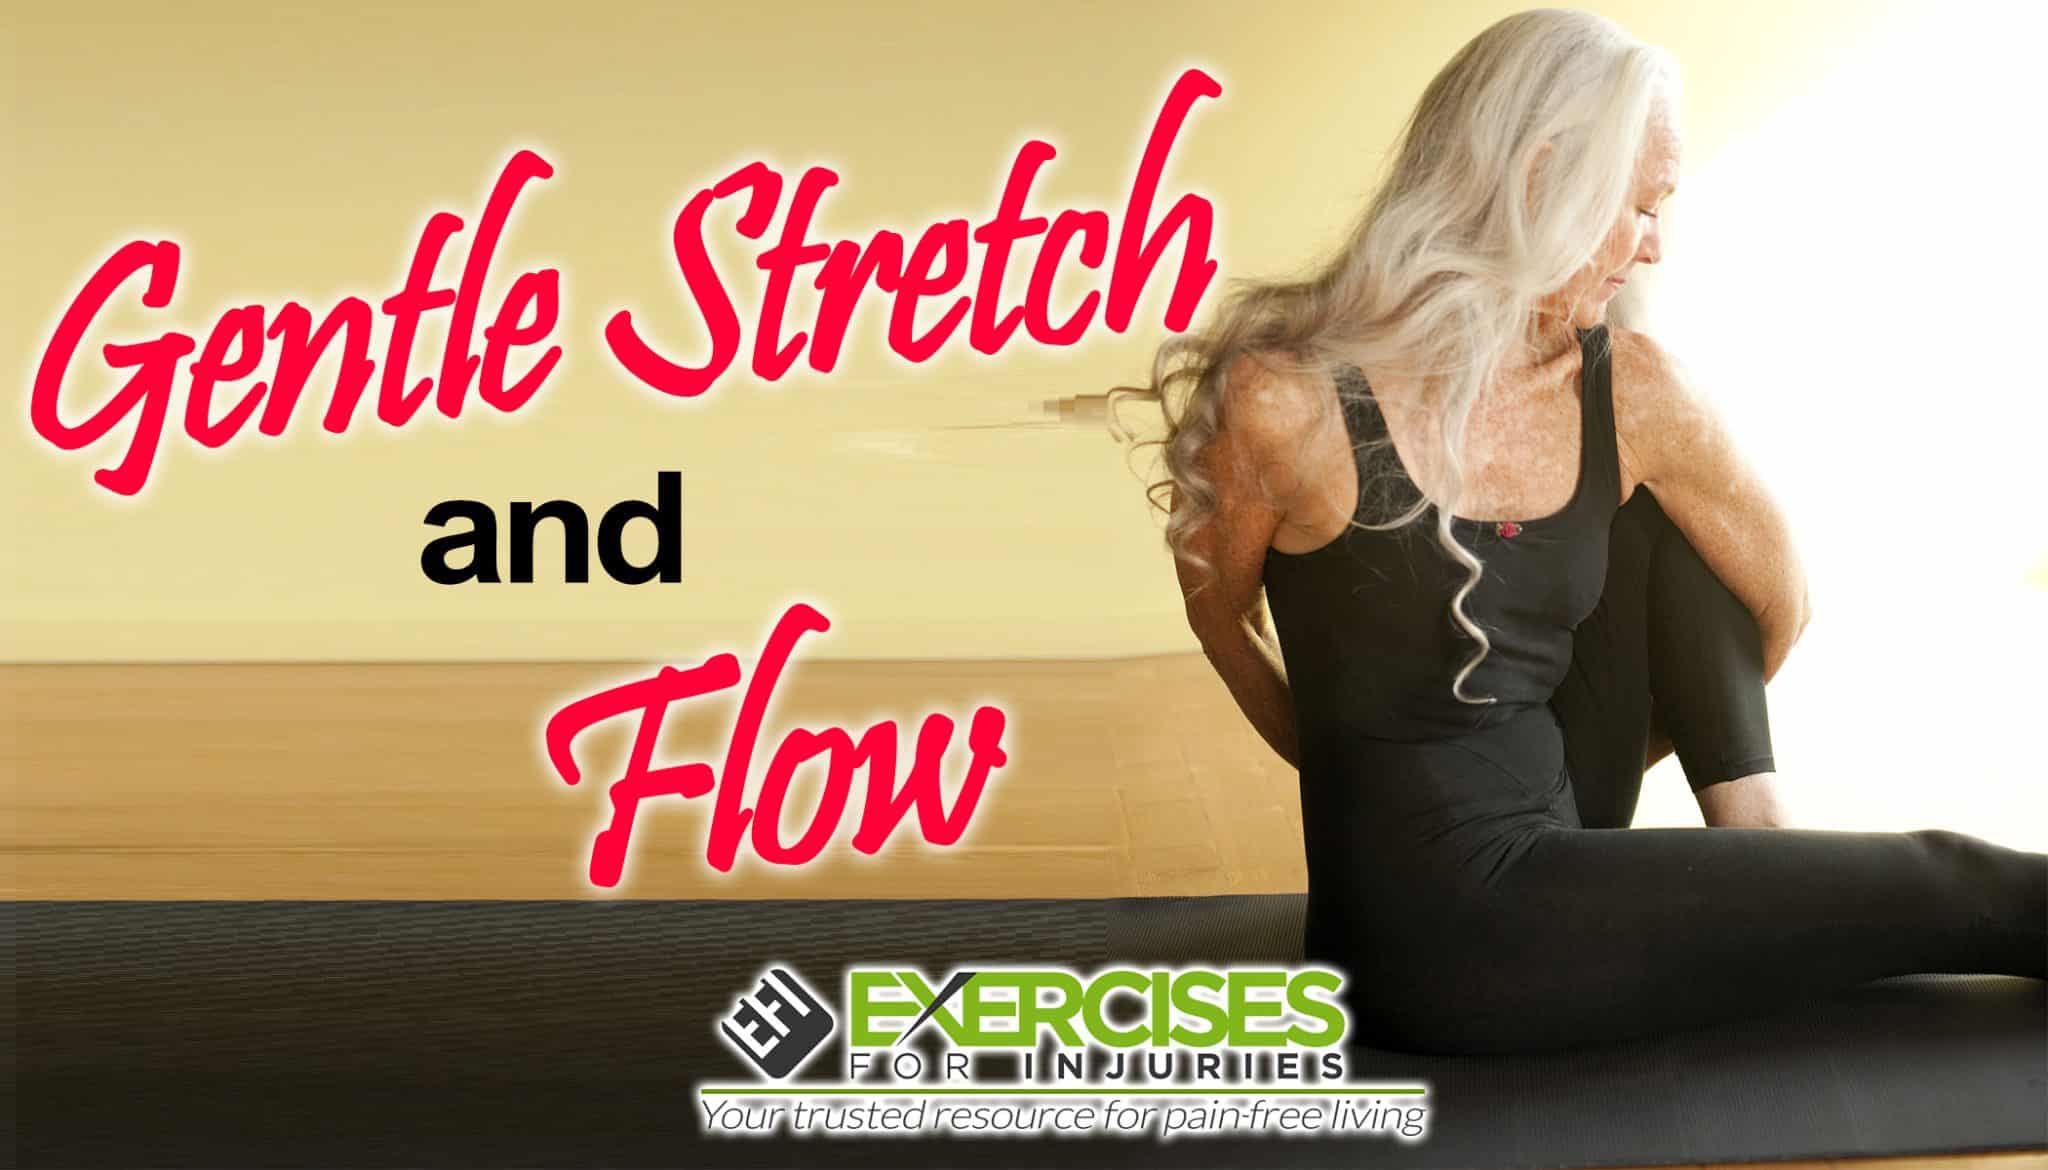 Gentle Stretch and Flow